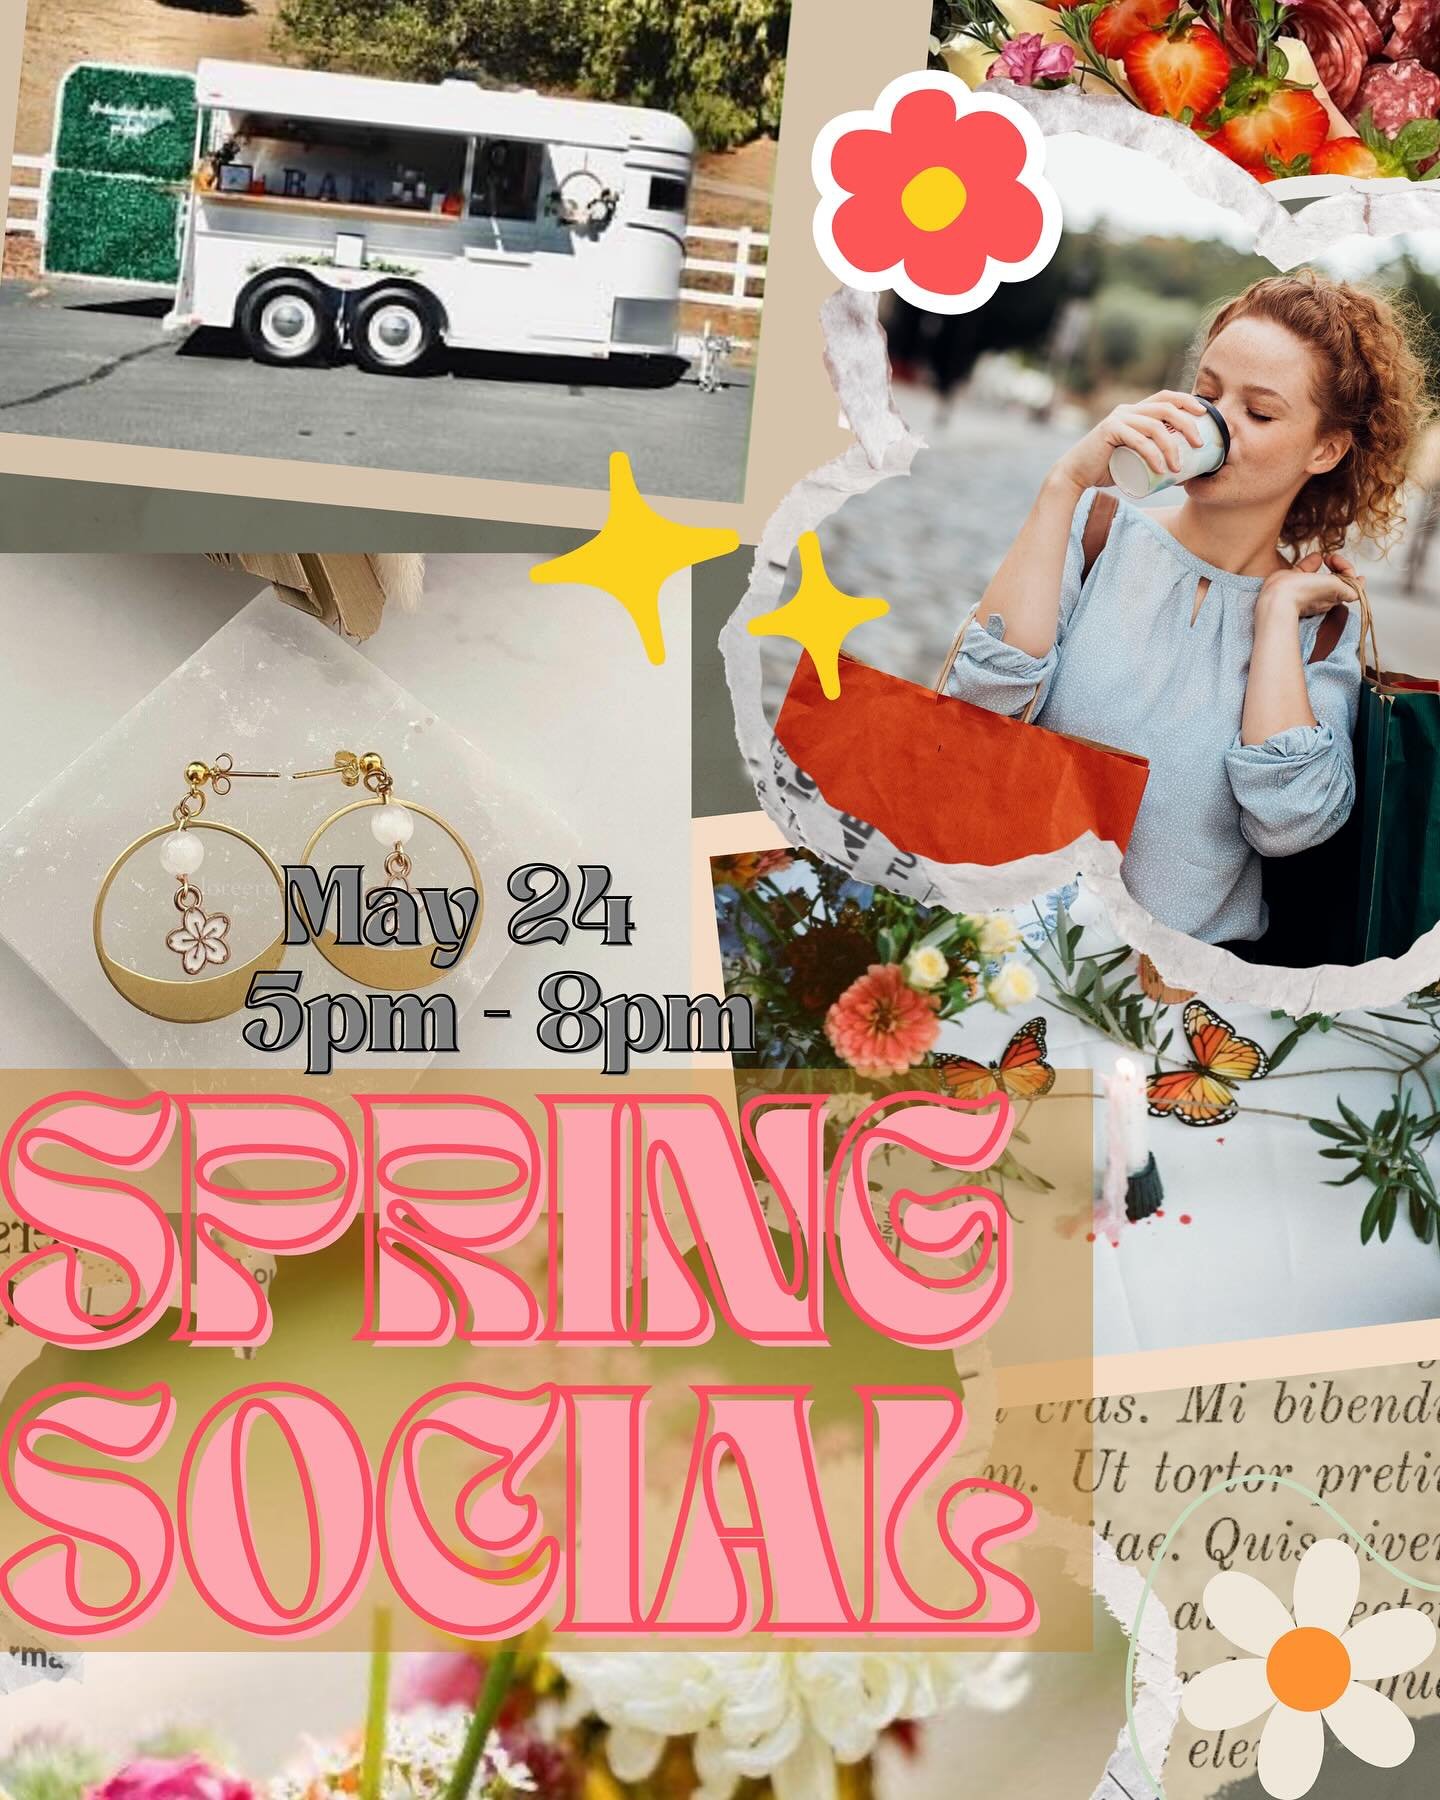 🌸✨Get ready to spring into action! We&rsquo;re thrilled to announce the Spring Social coming May 24th to Downtown Vallejo! Sip on fine wines and craft beers locally sourced, shop from local artisans, and socialize with friends against the backdrop o